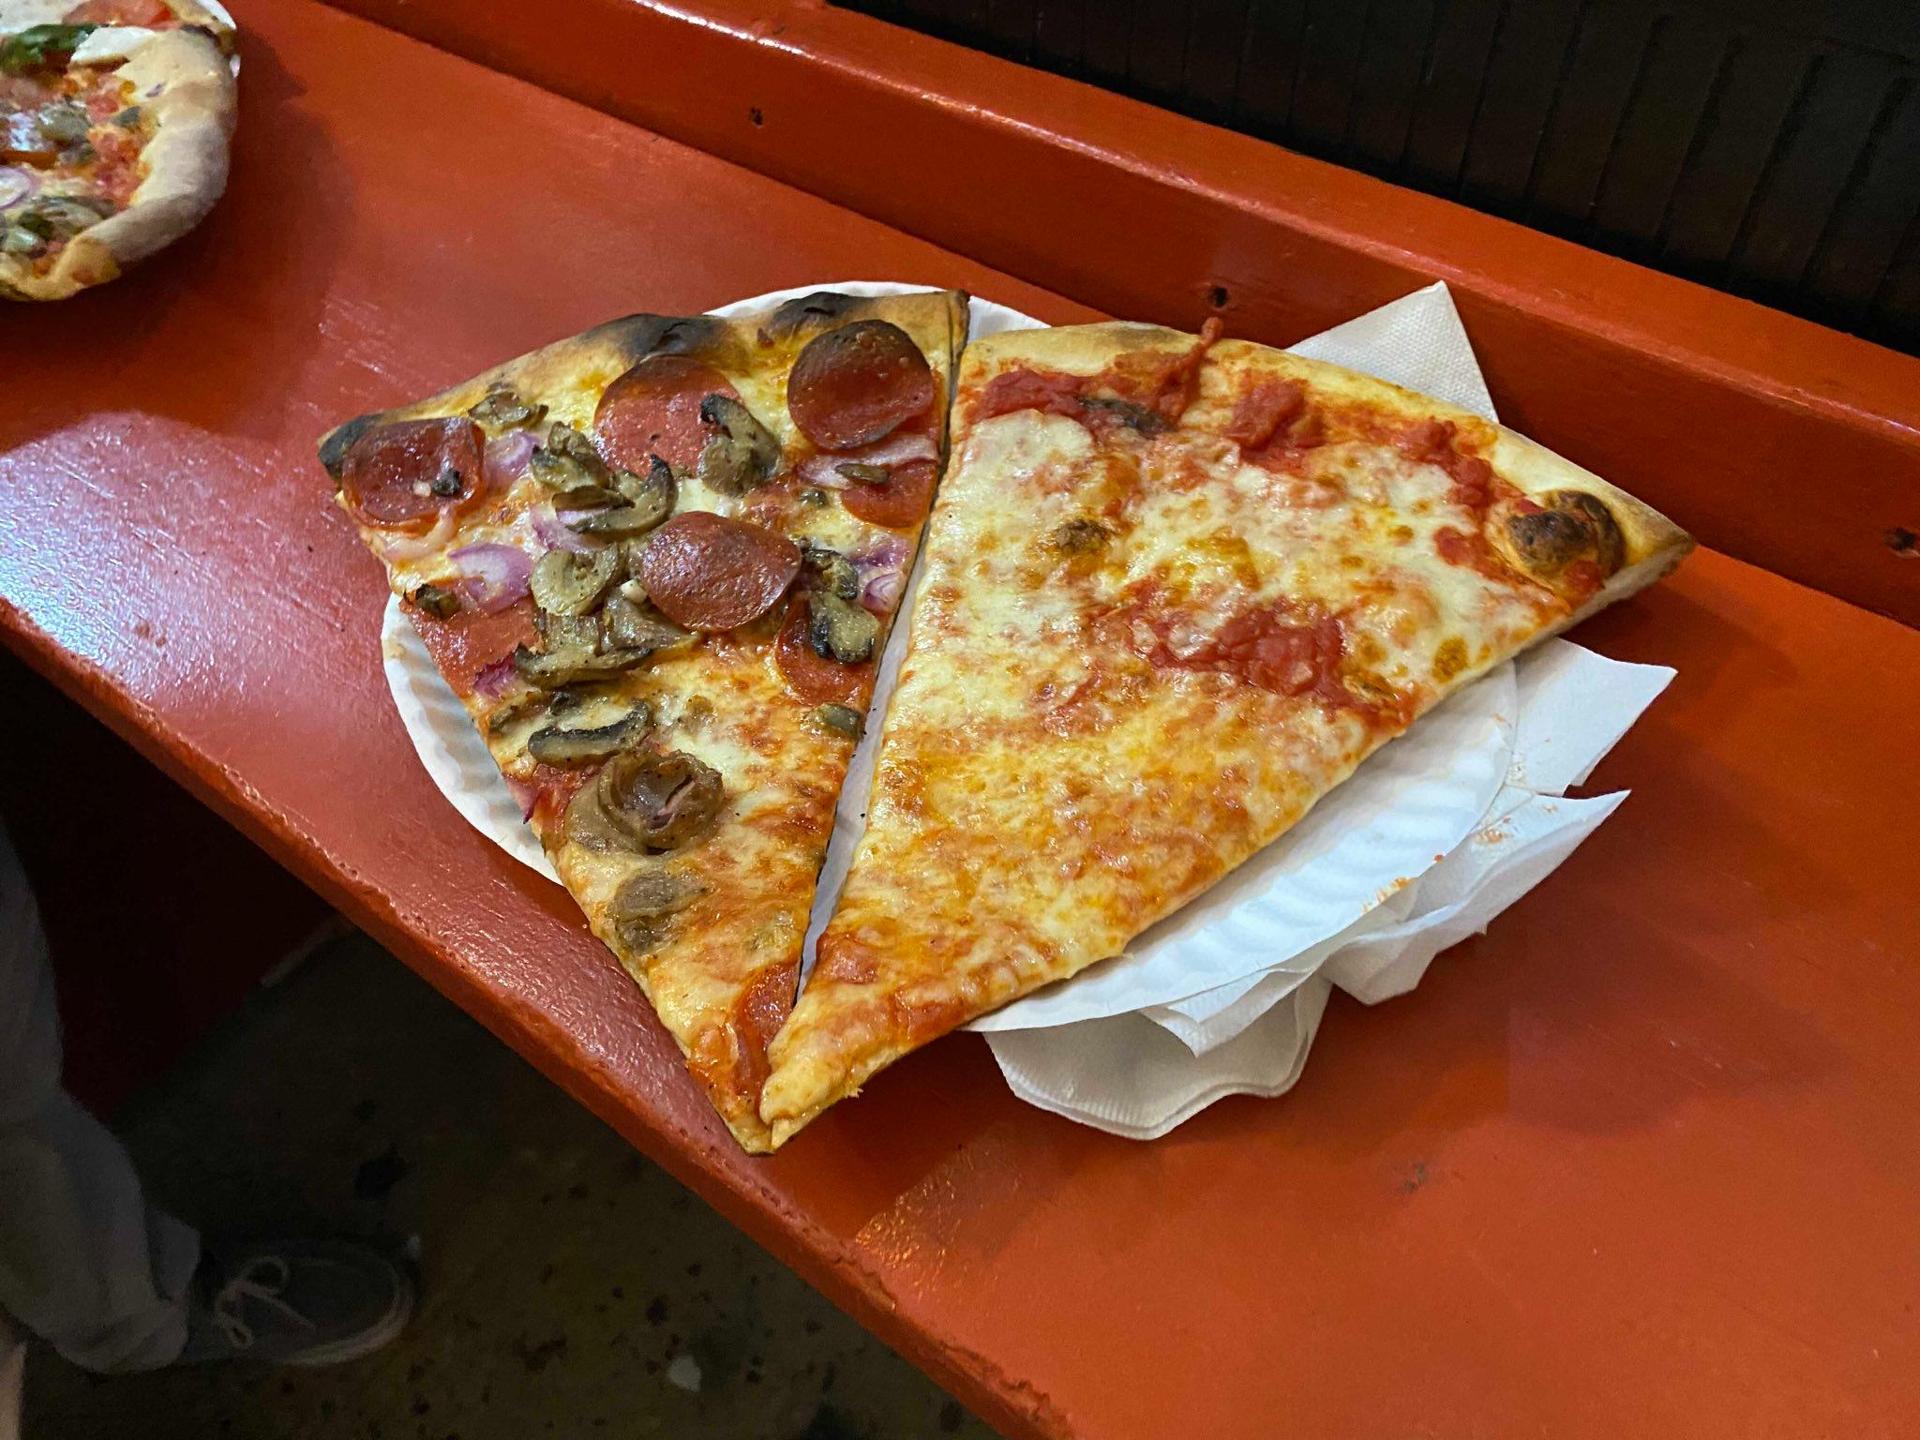 Image of some food from Joe's Pizza